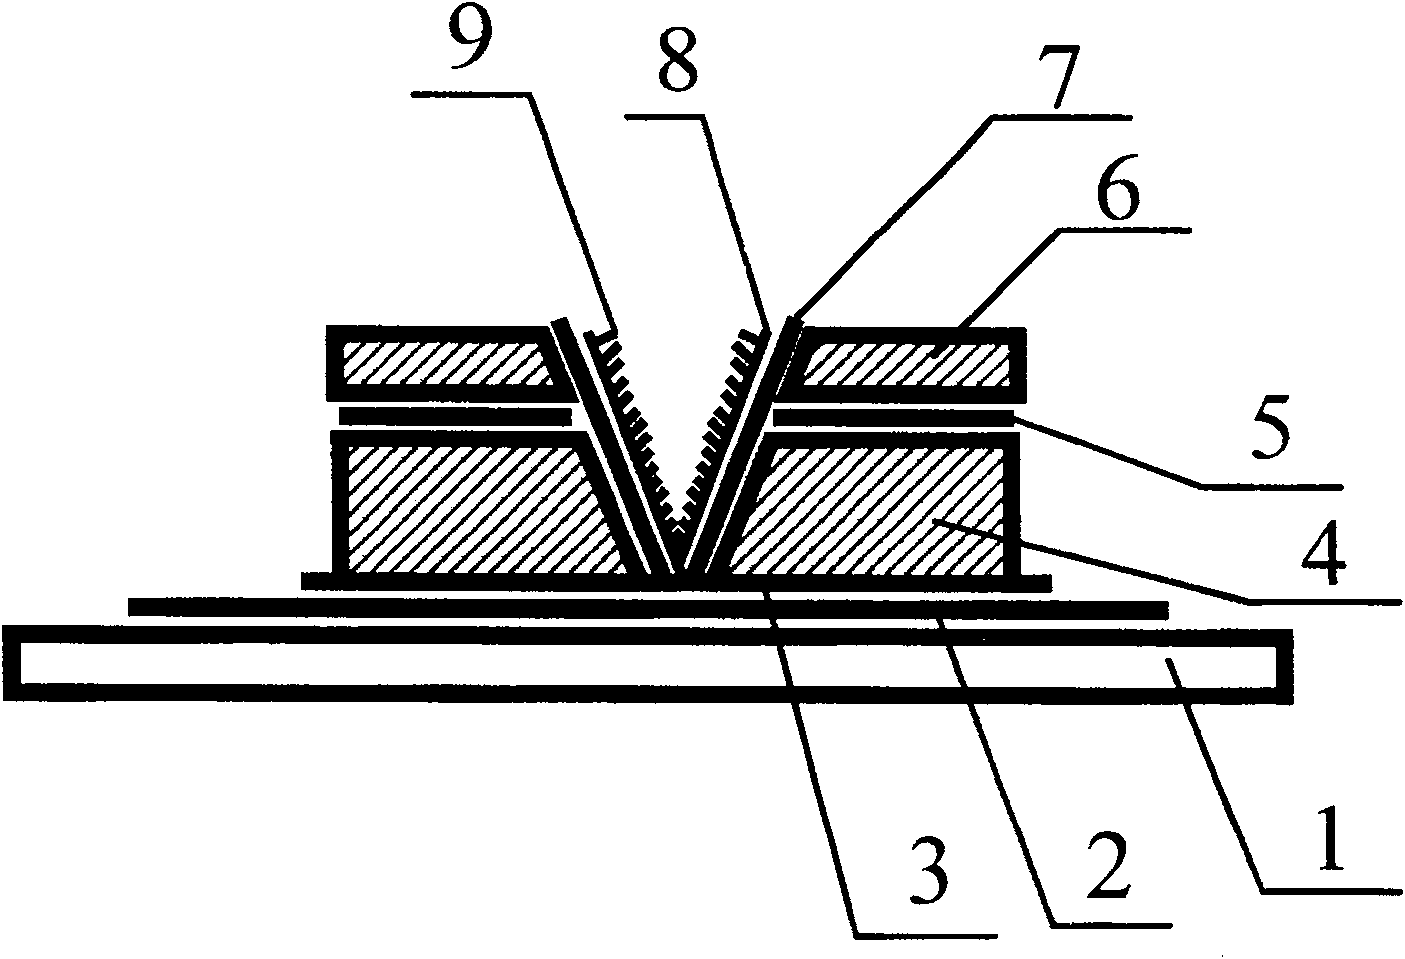 Flat board display of bevel cathode side-grid controlled structure and manufacturing process